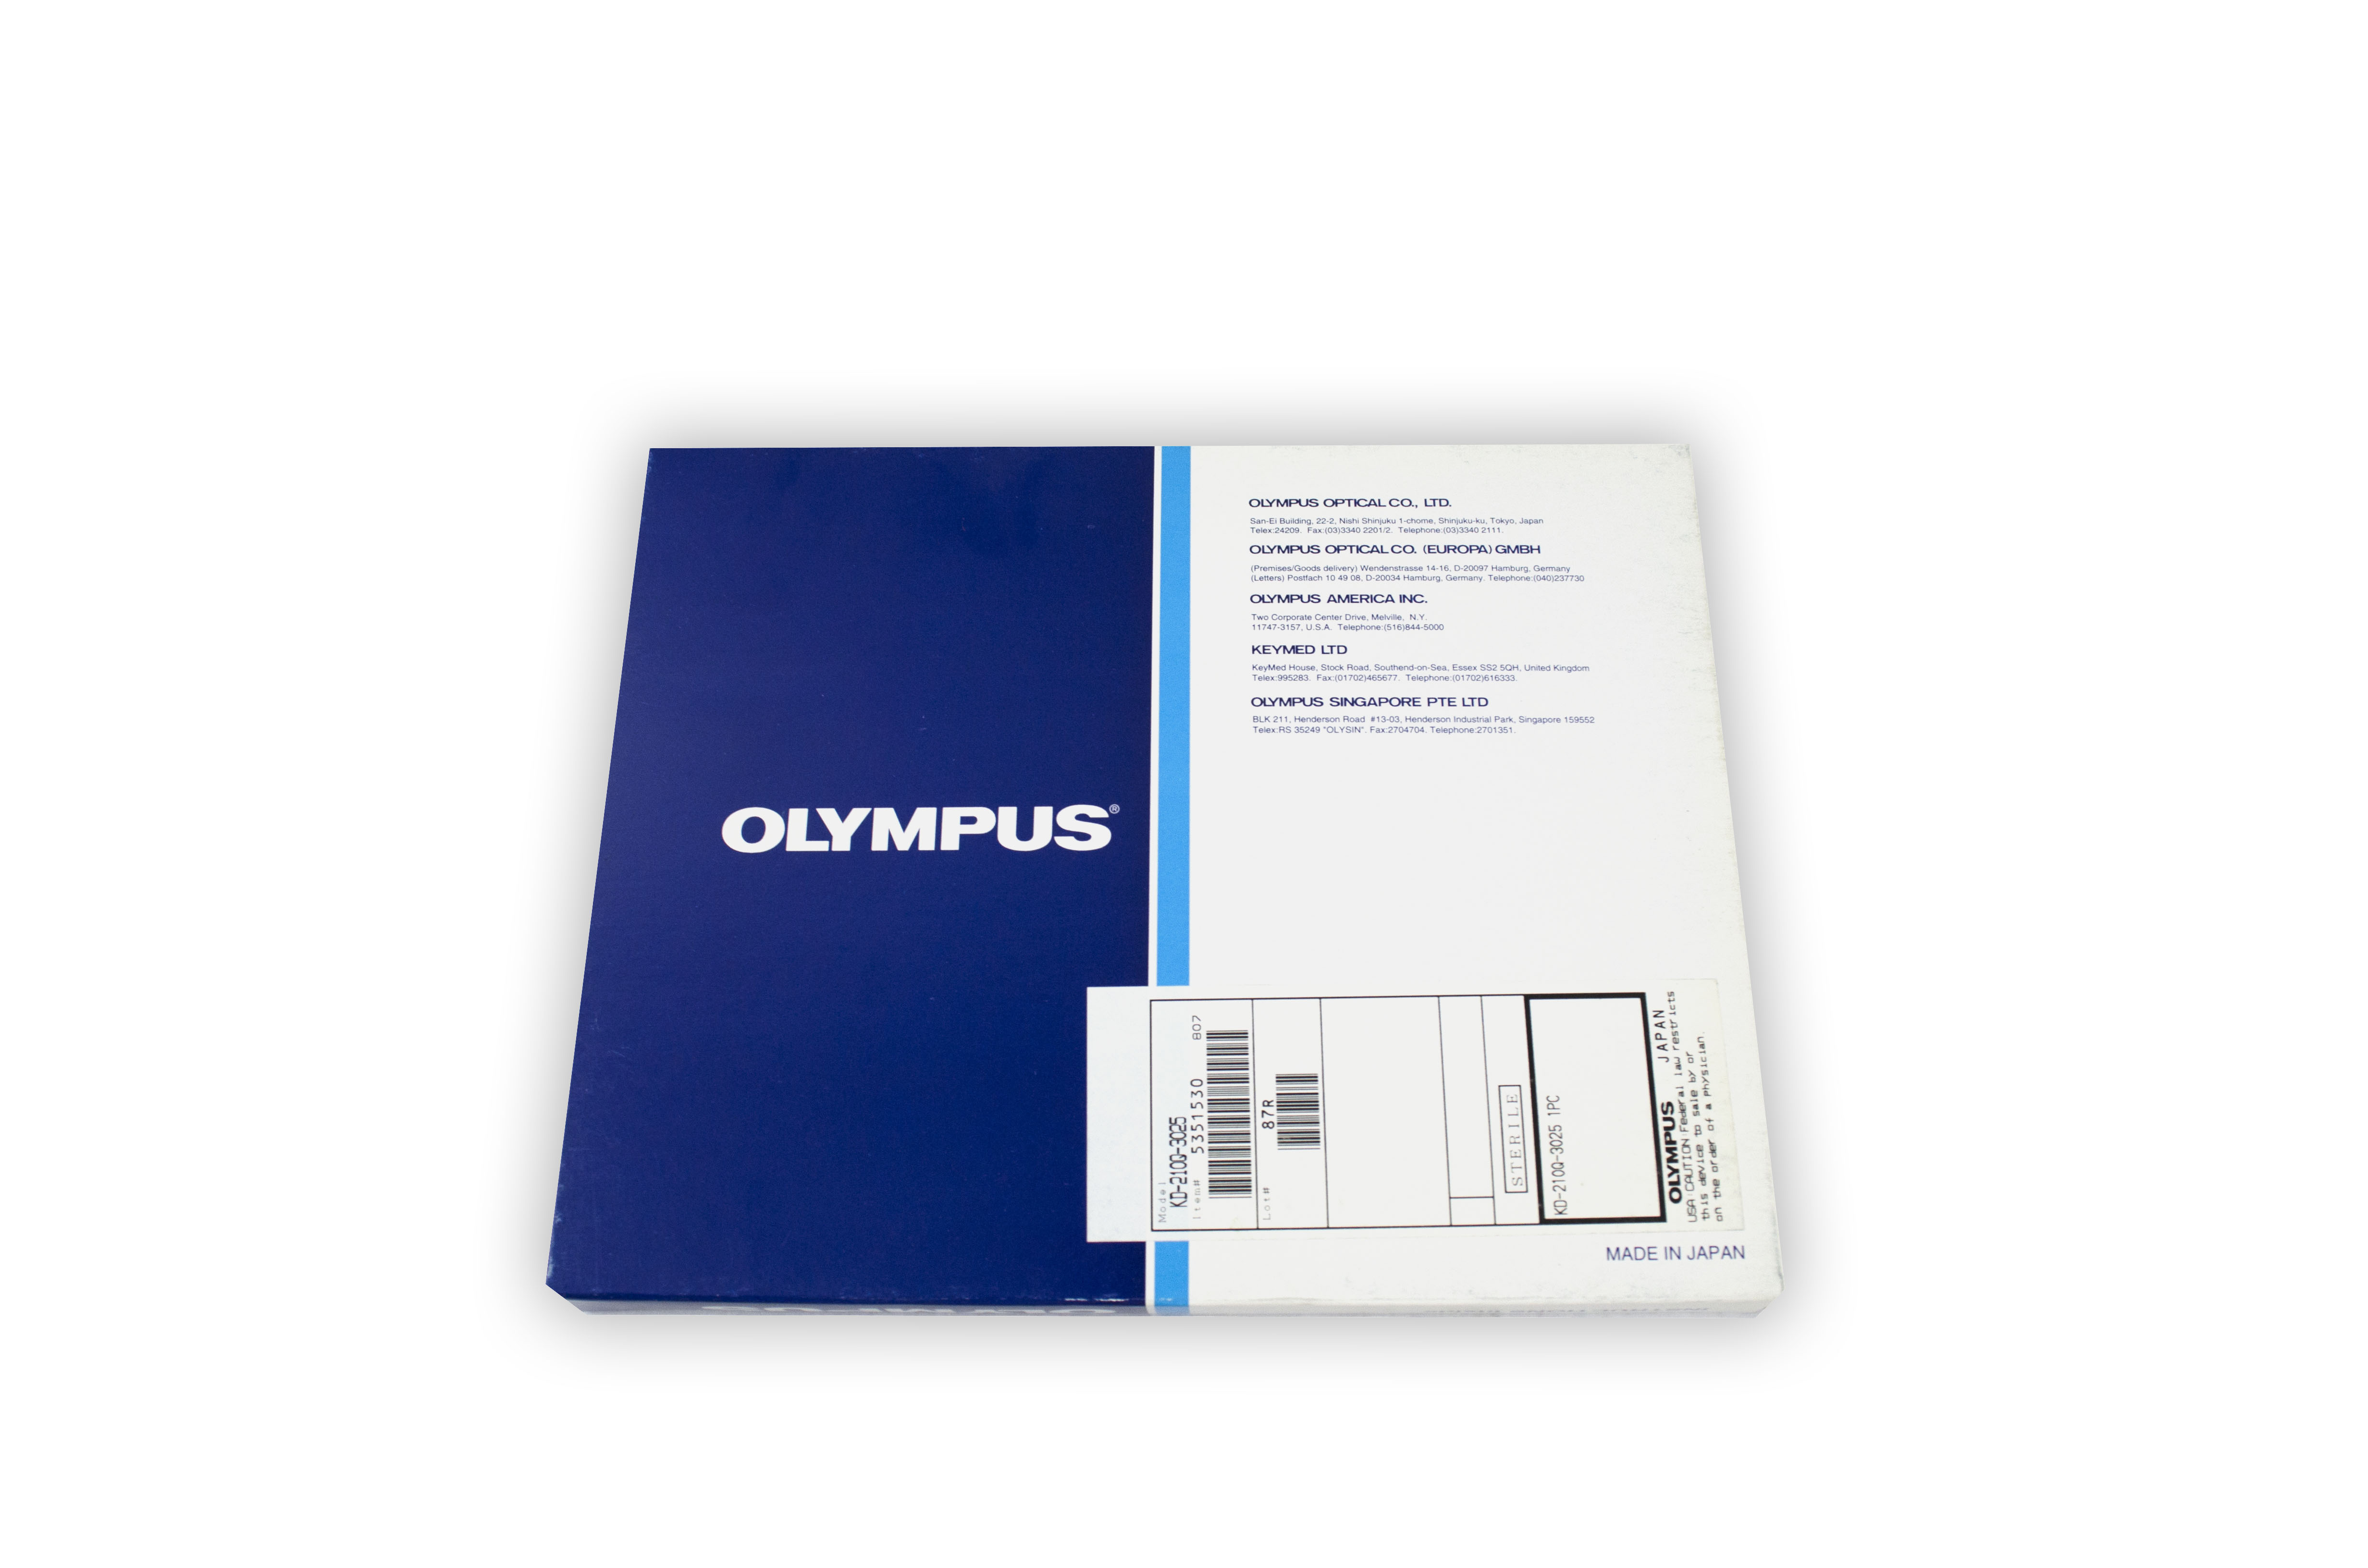 [Out-of-Date] Olympus Disposable Sphincterotome - KD-210Q-3025